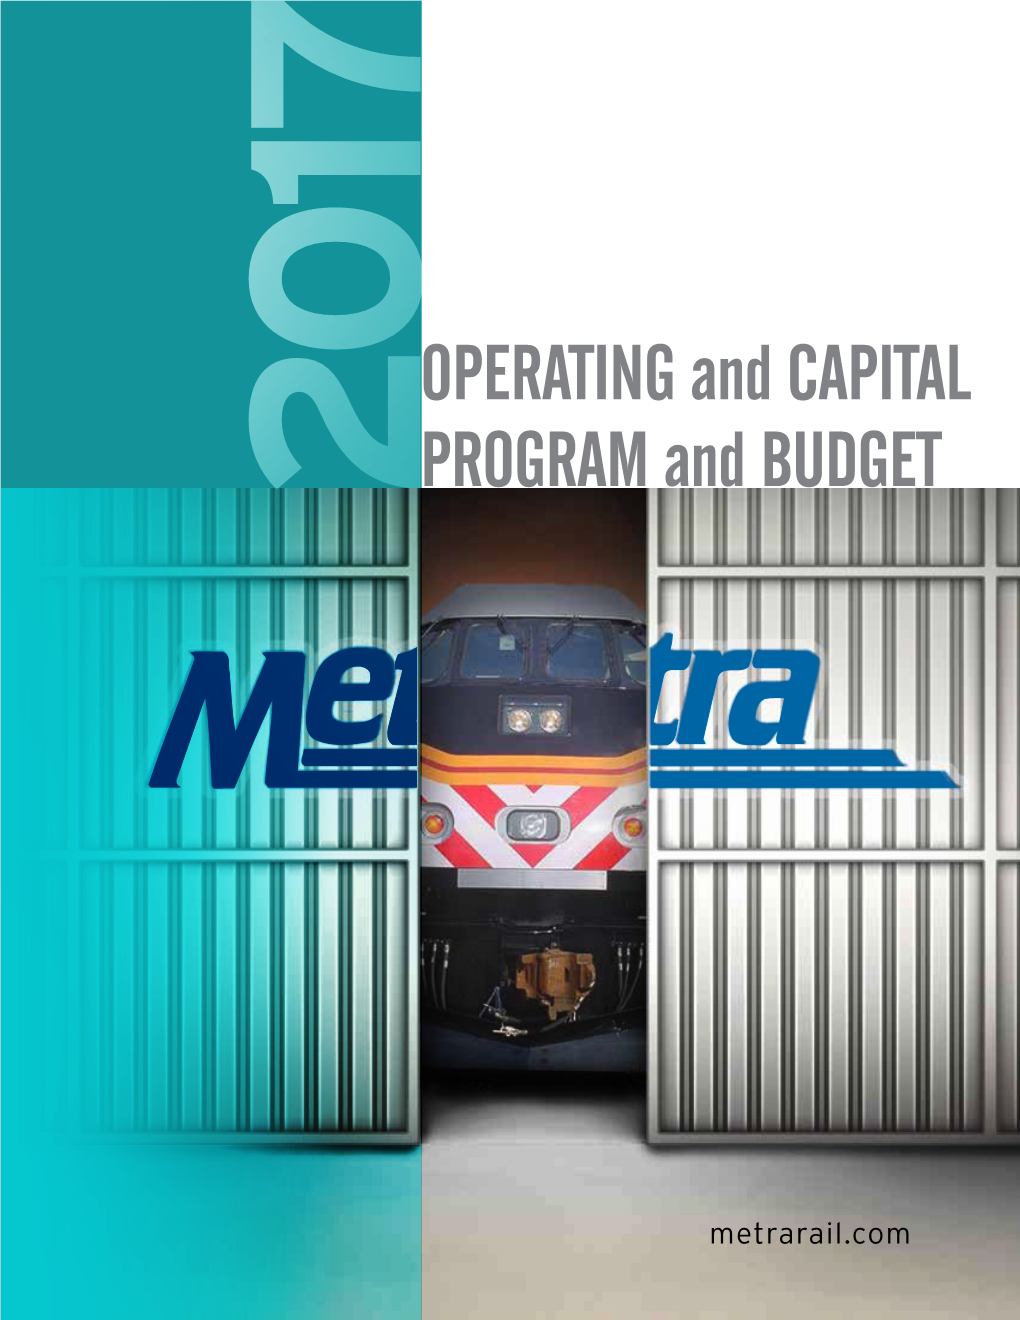 OPERATING and CAPITAL PROGRAM and BUDGET 1